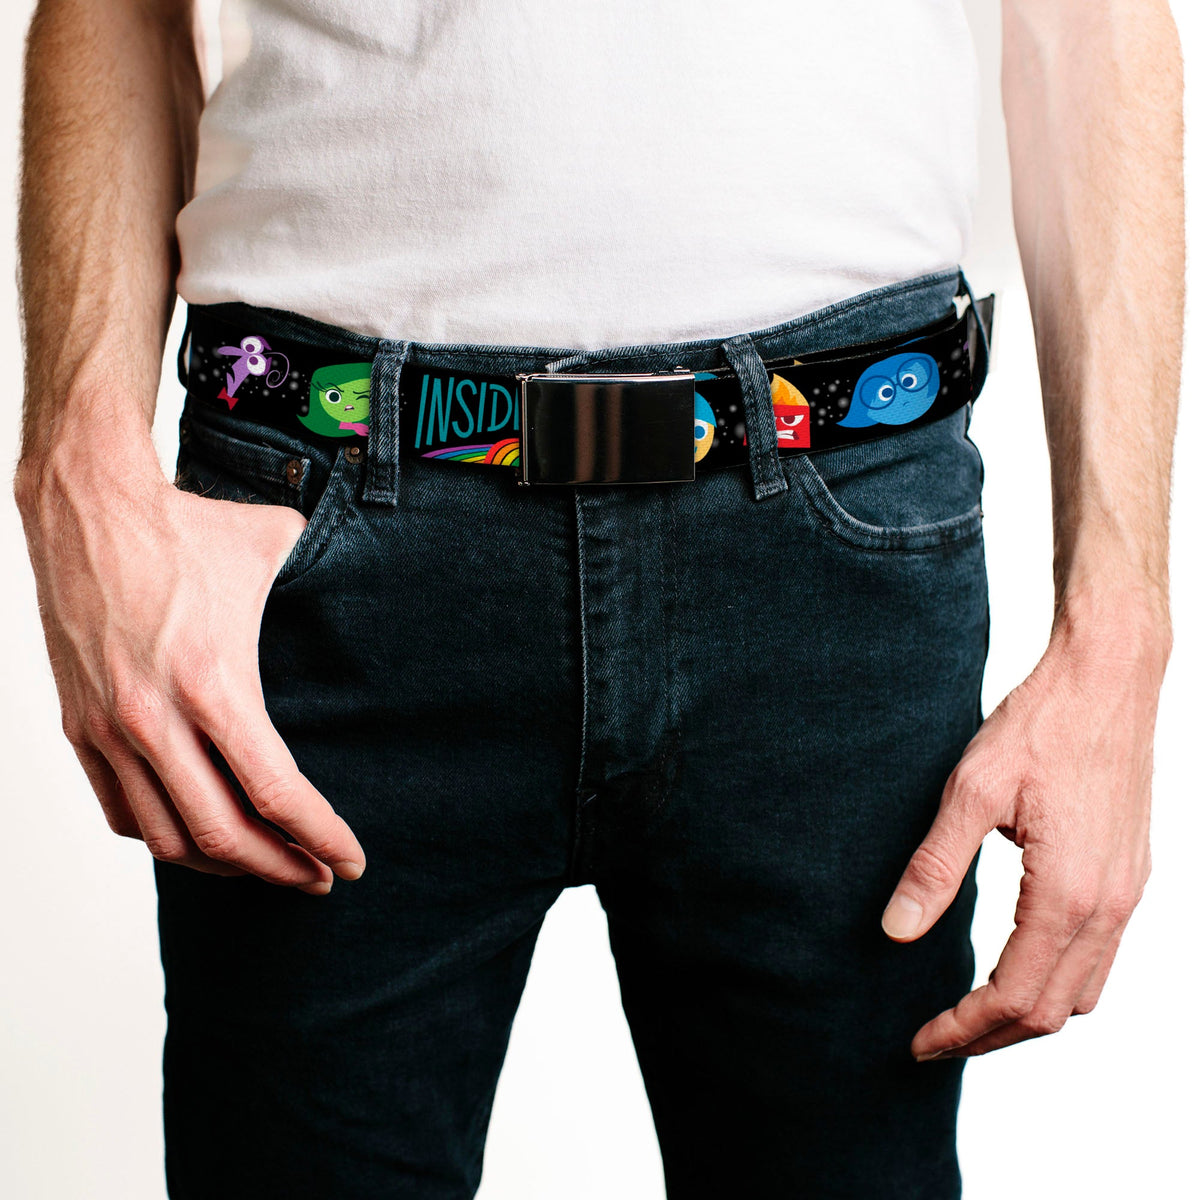 Chrome Buckle Web Belt - INSIDE OUT/Emotion Expressions/EVERY DAY IS FULL OF EMOTIONS Webbing